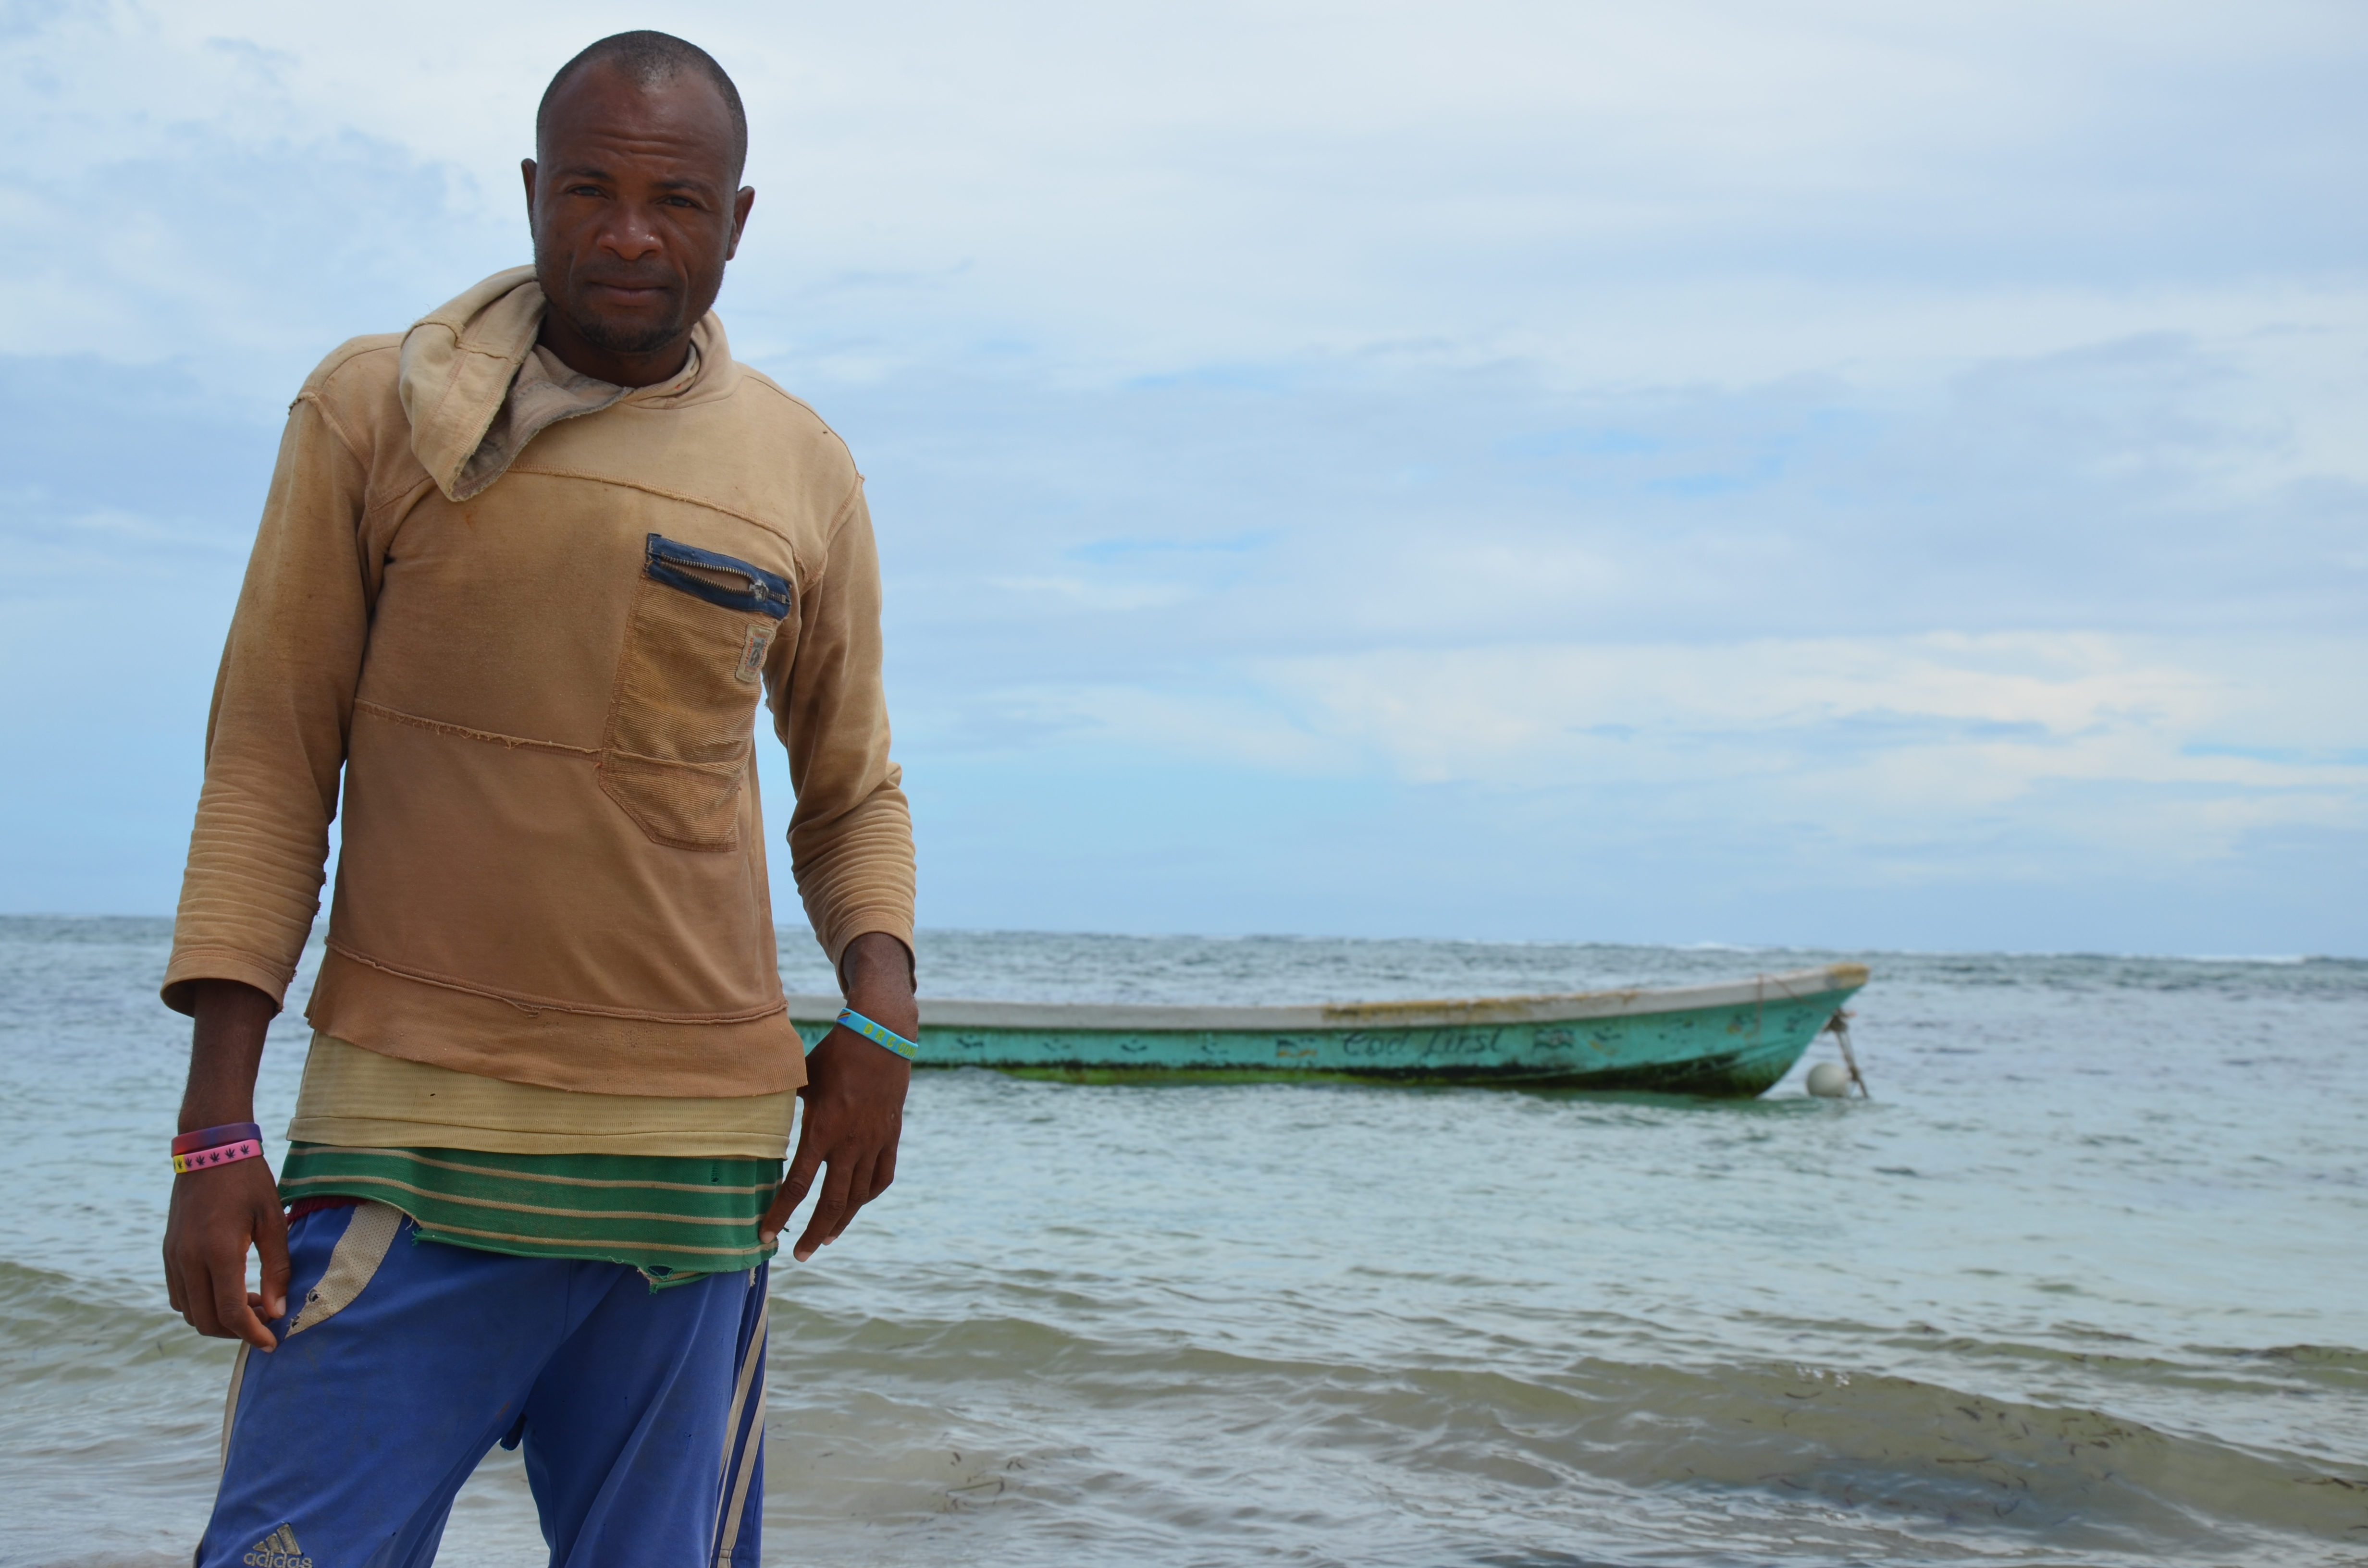 Among the Kanamai fishermen, 30 year-old coxswain Salim Nathaniel Baracka operates with two colleagues a 6-7 meters long motorised boat named Eden. 